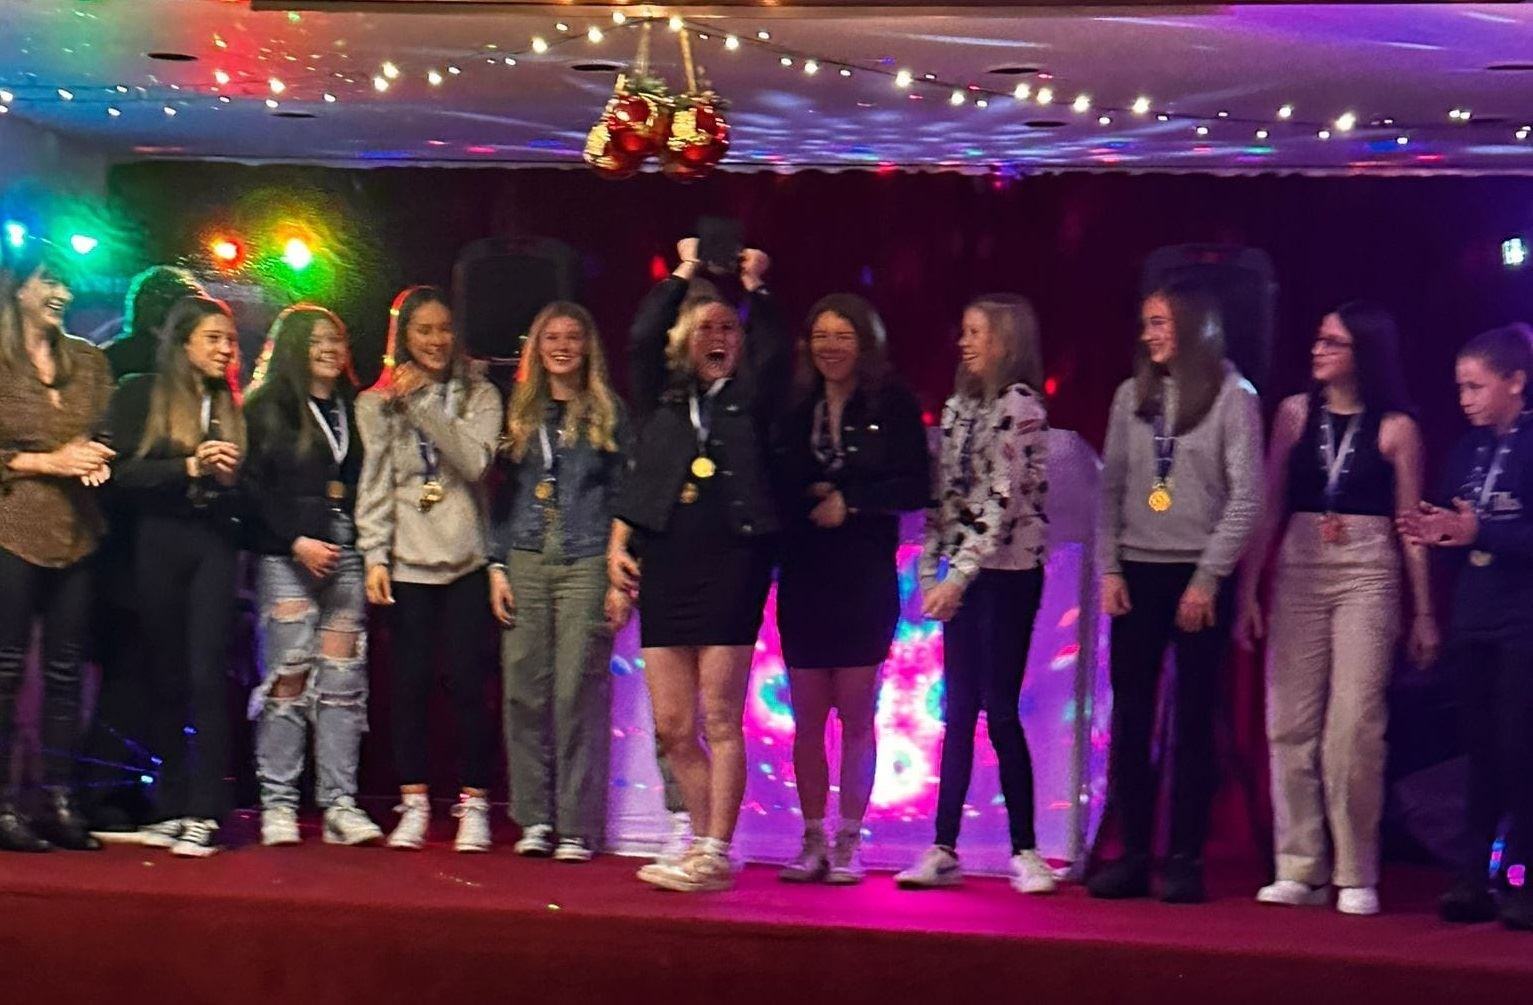 Ross County's under-14 girls' squad went unbeaten on their way to winning the Highland League.